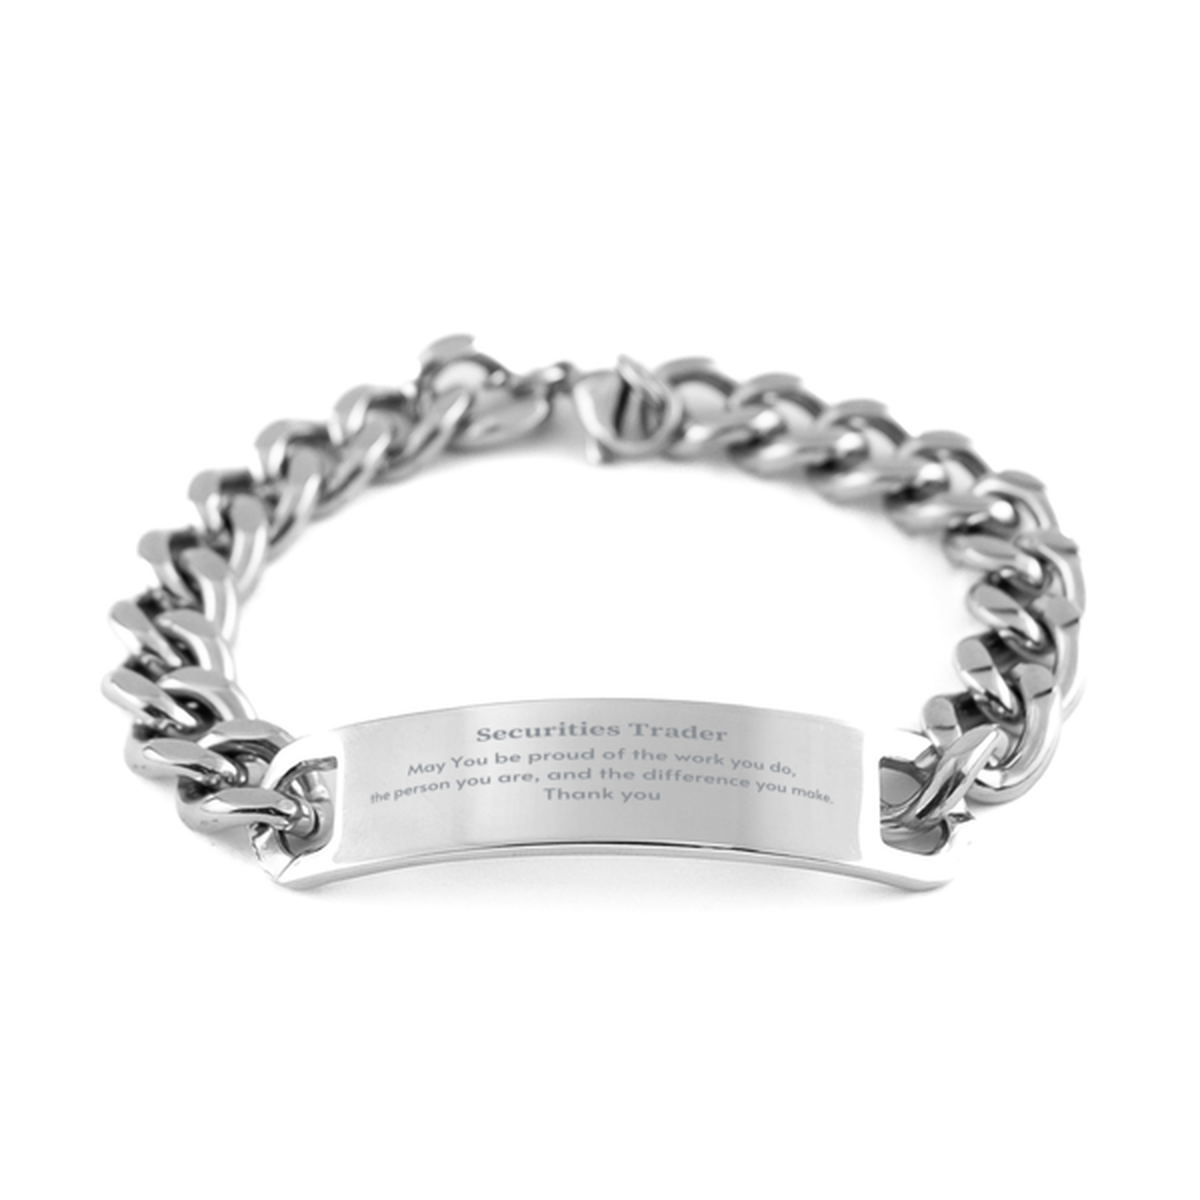 Heartwarming Cuban Chain Stainless Steel Bracelet Retirement Coworkers Gifts for Securities Trader, Securities Trader May You be proud of the work you do, the person you are Gifts for Boss Men Women Friends